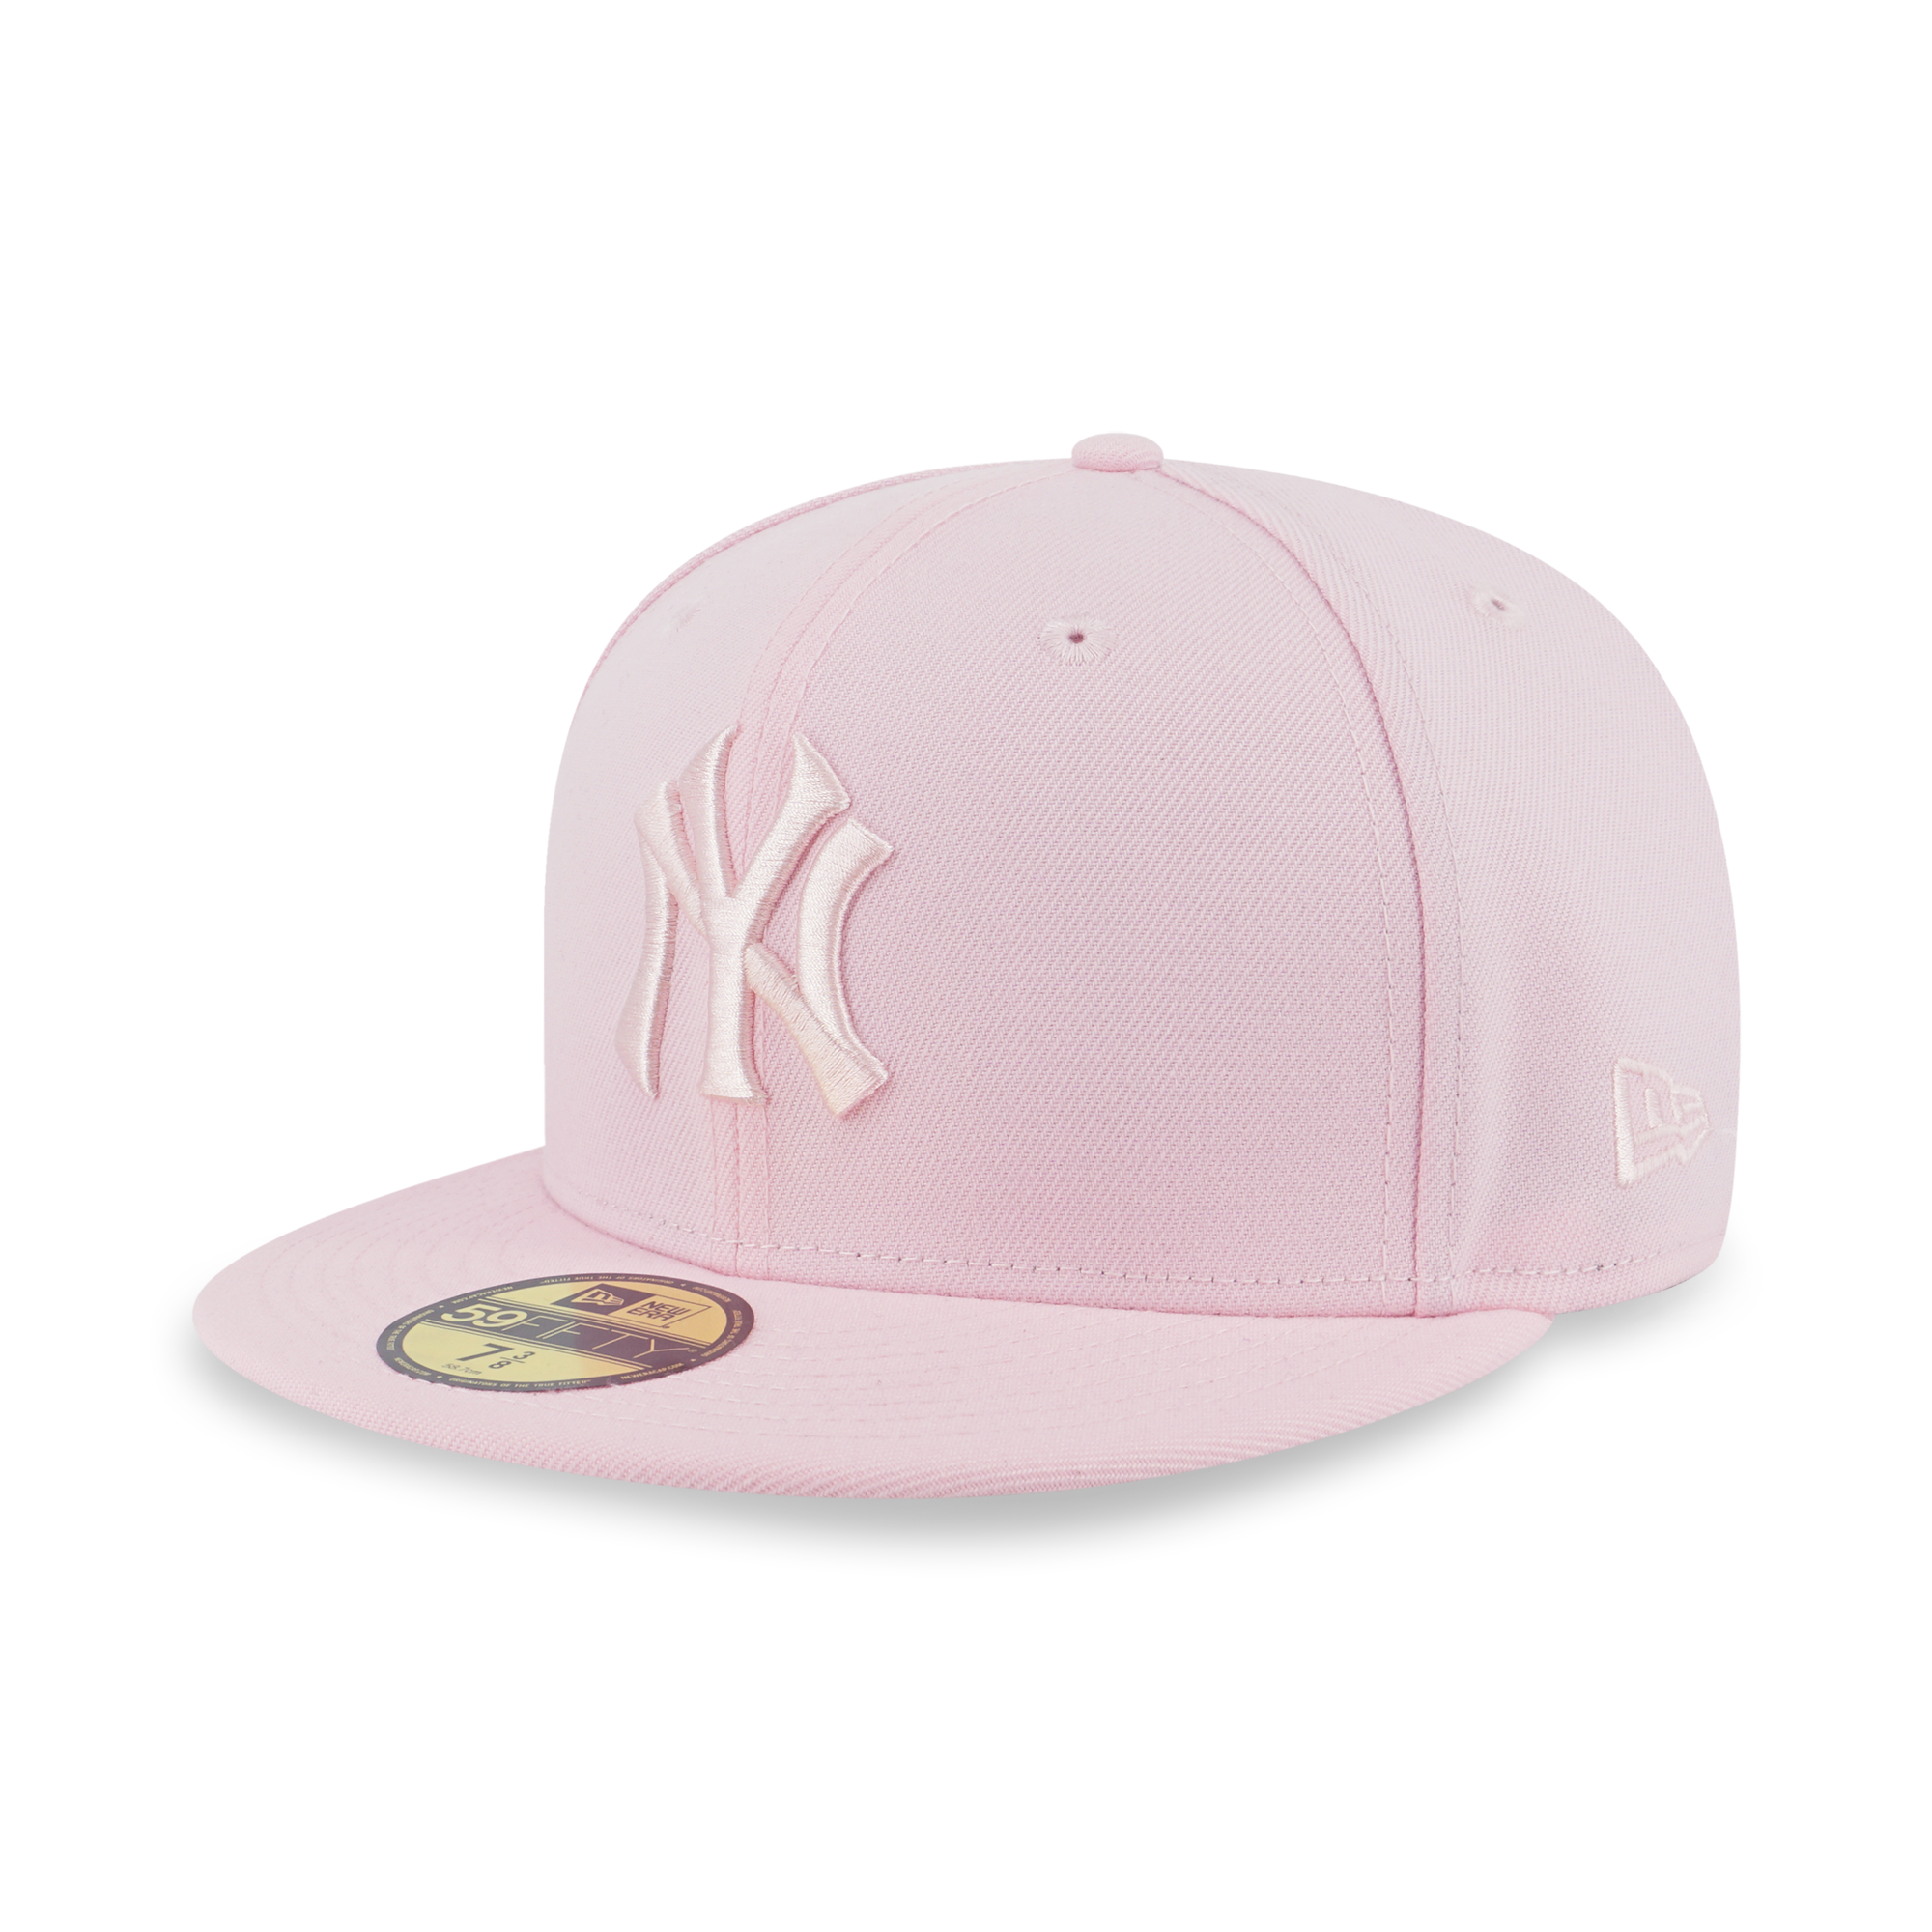 59FIFTY PACK - SAKURA NEW YORK YANKEES COOPERSTOWN LAVA RED UNDERVISOR PINK 59FIFTY CAP